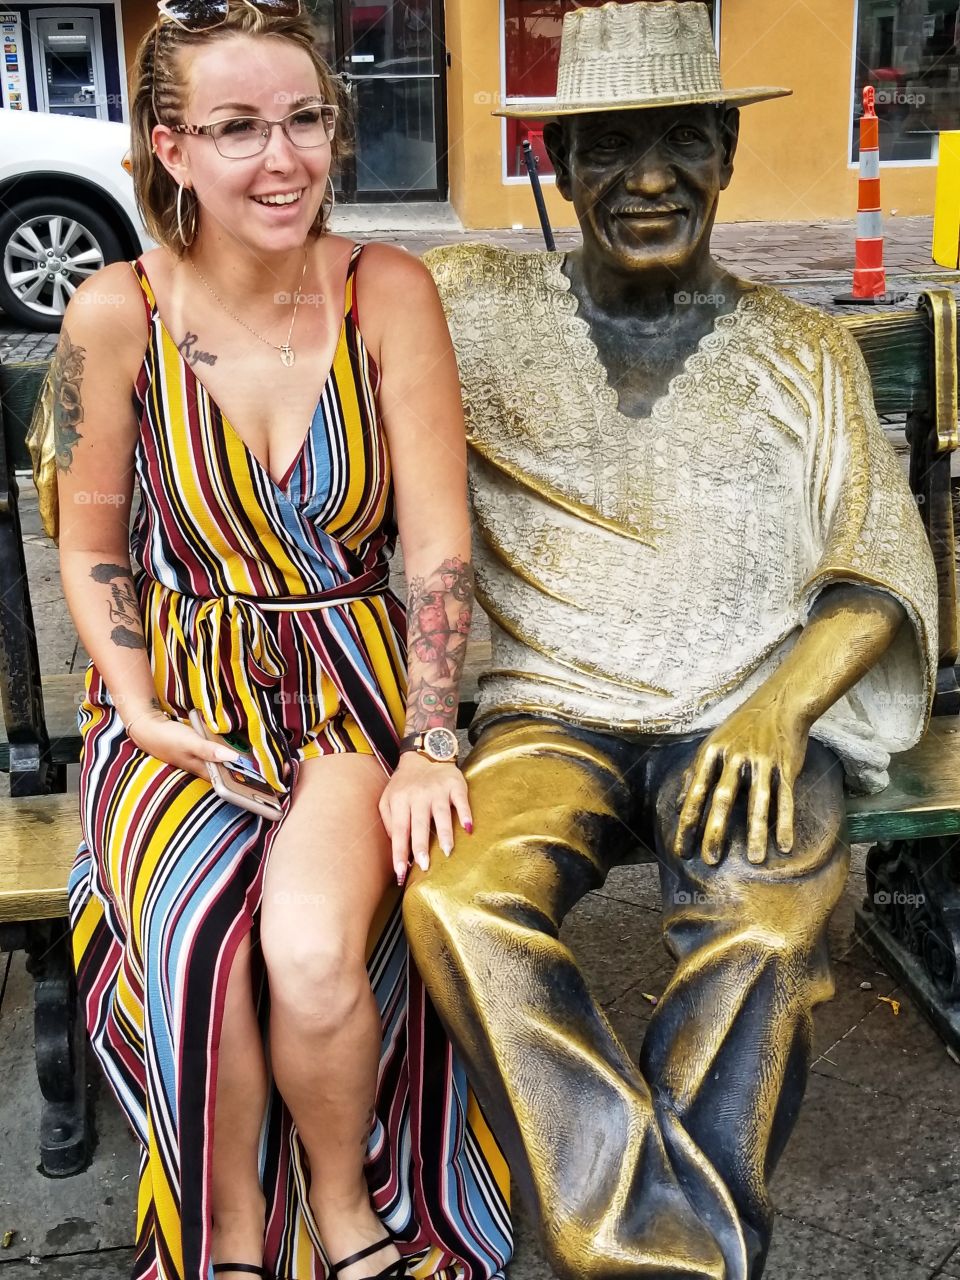 Sitting next to statue pretending its your new friend😂